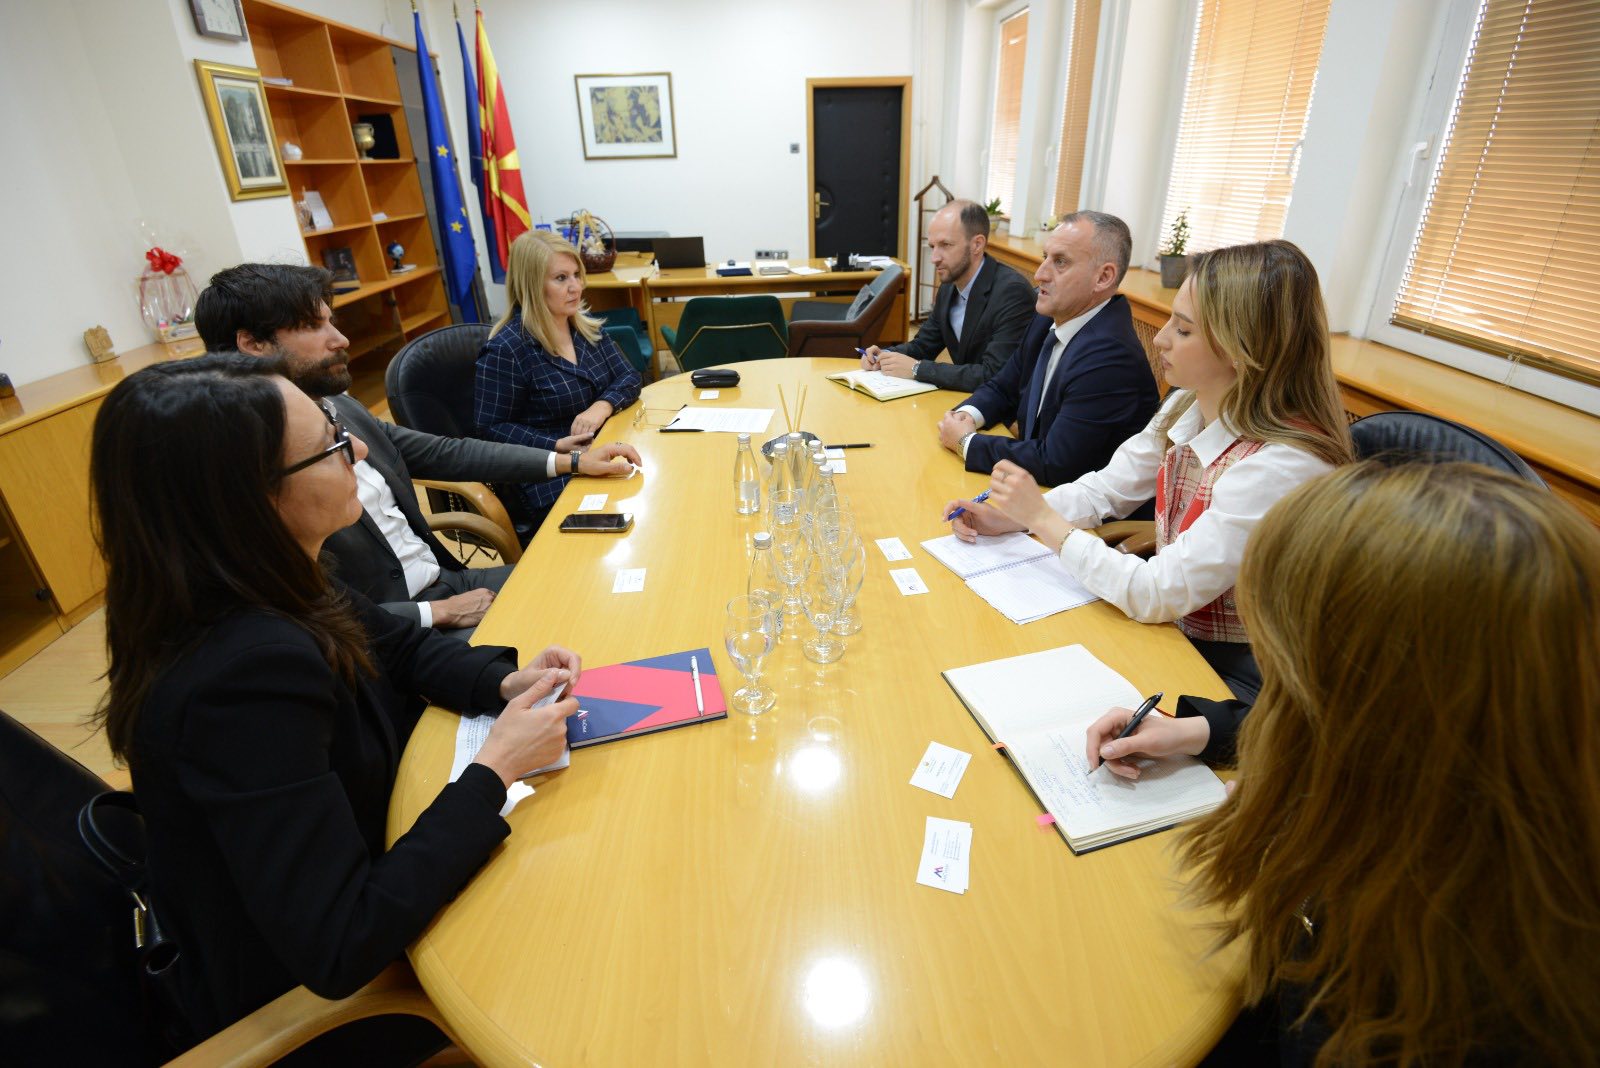 Meeting with the Minister of Health